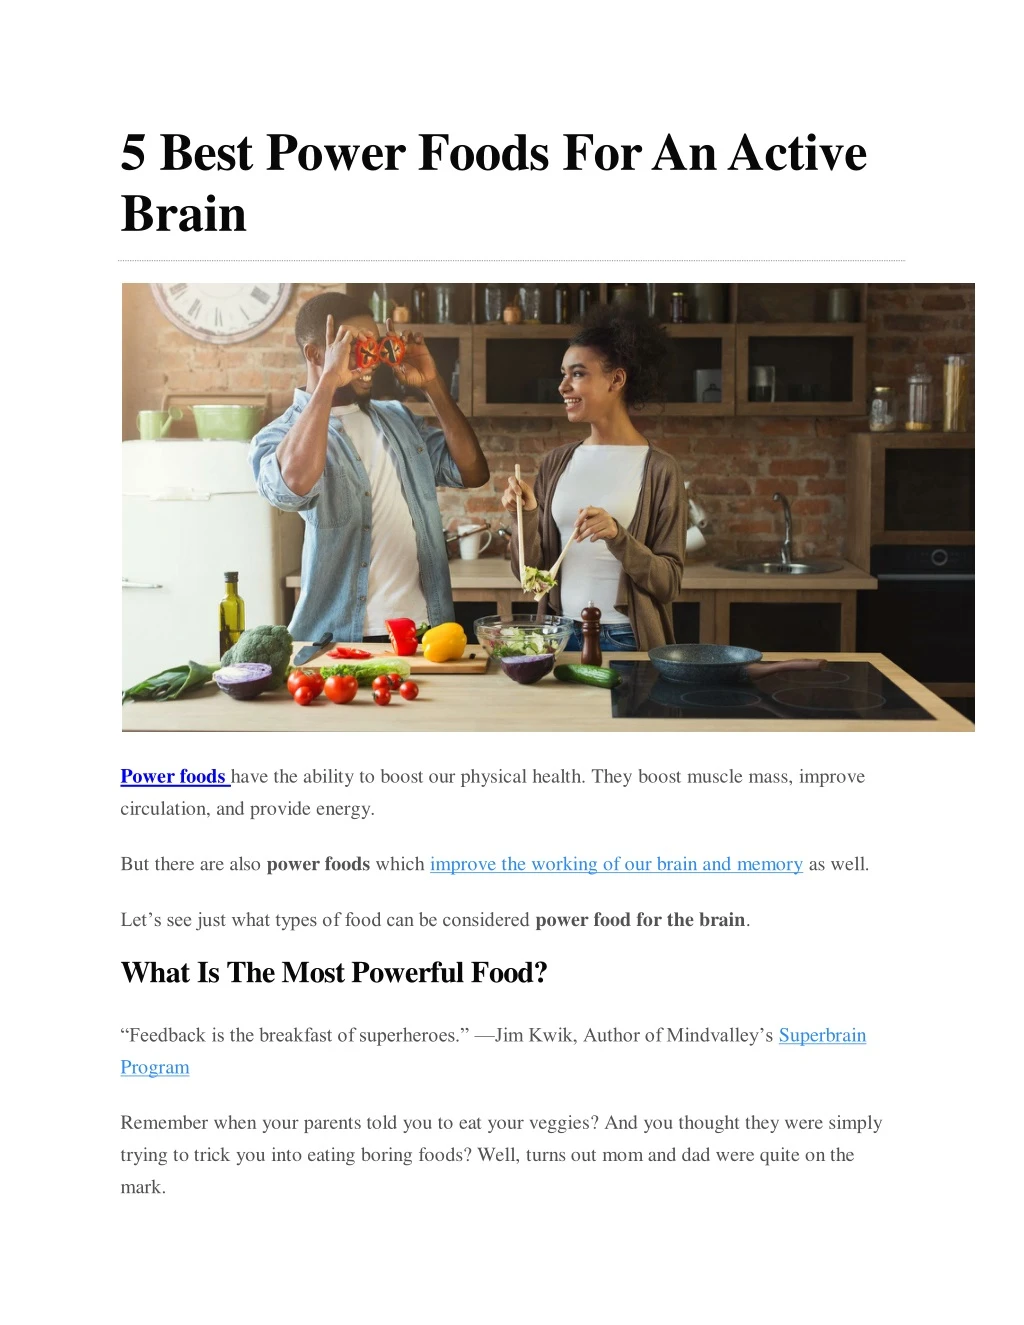 5 best power foods for an active brain